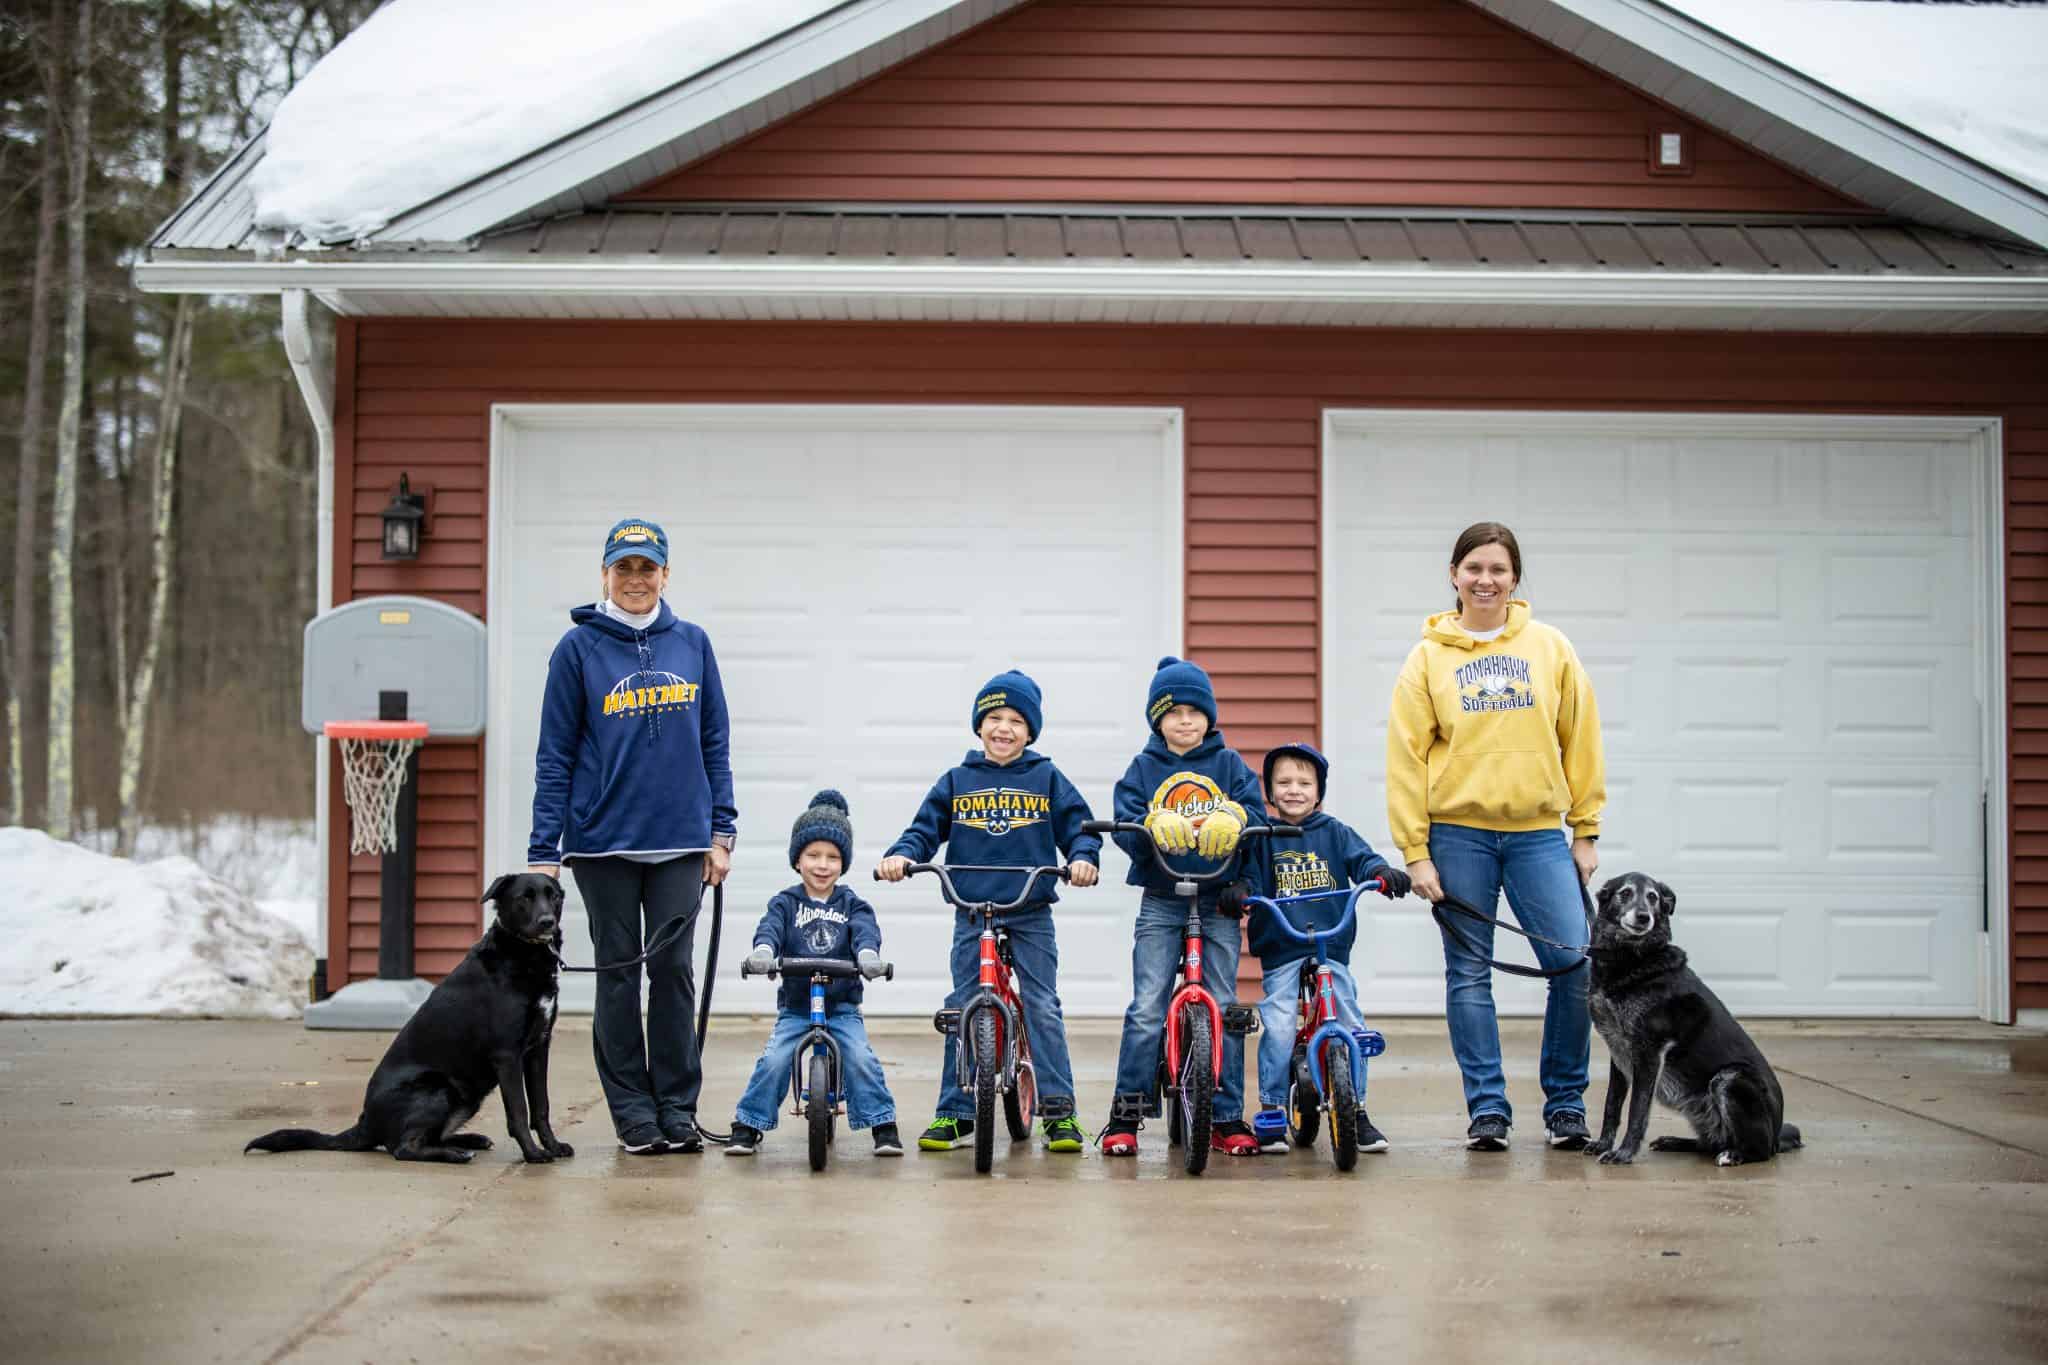 Front Porch Project: Photographer looks to add joy, hope to local families